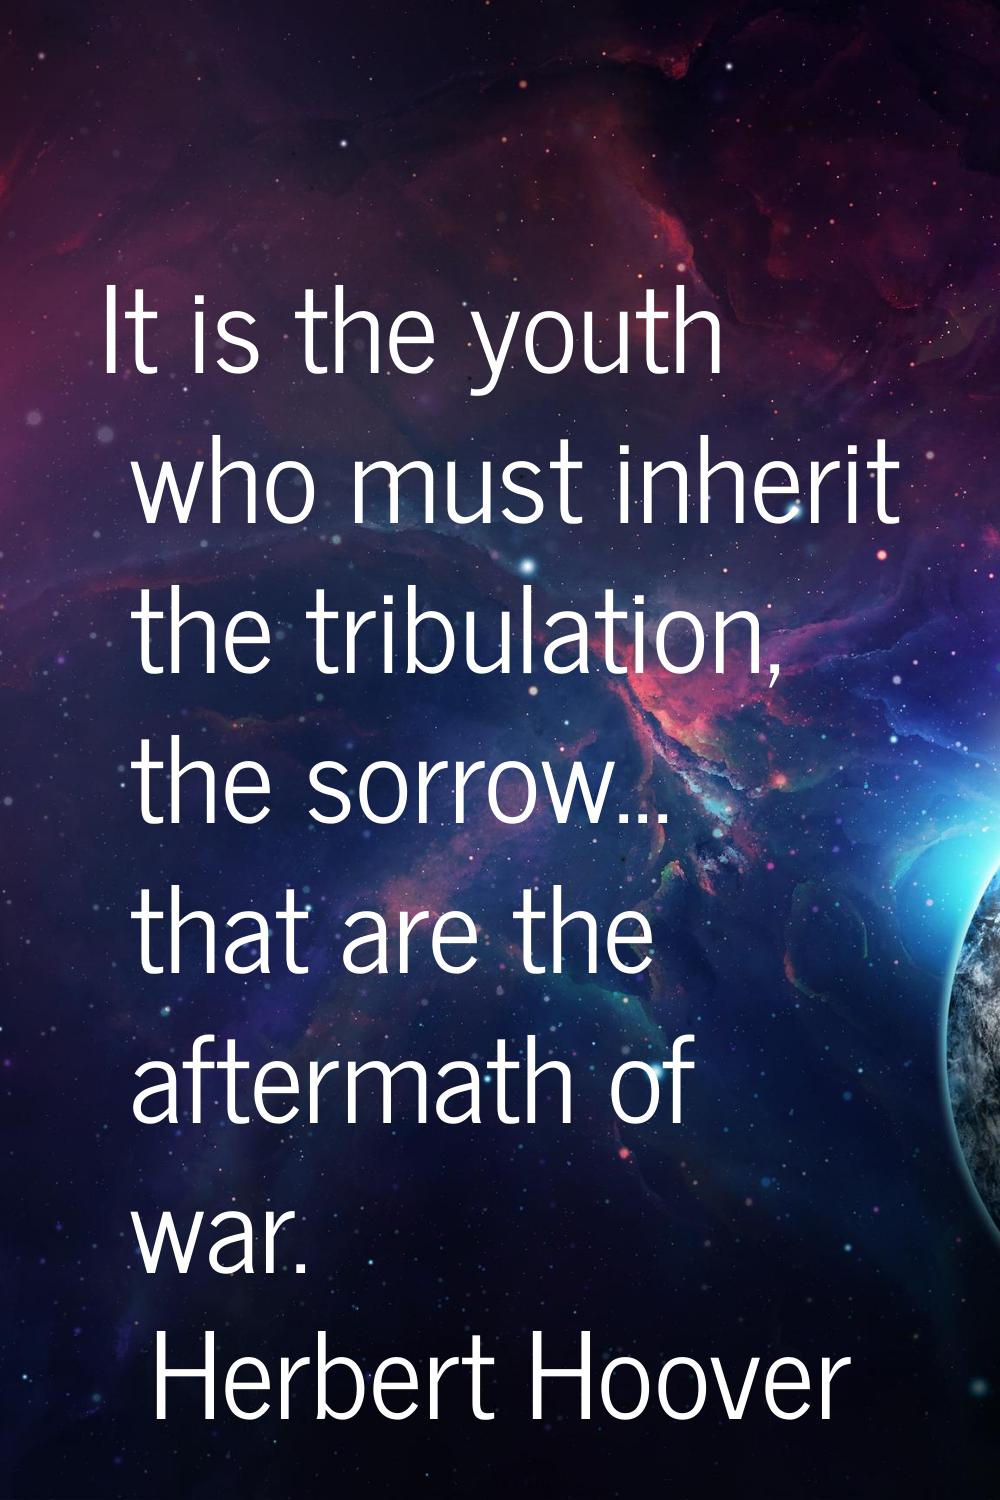 It is the youth who must inherit the tribulation, the sorrow... that are the aftermath of war.